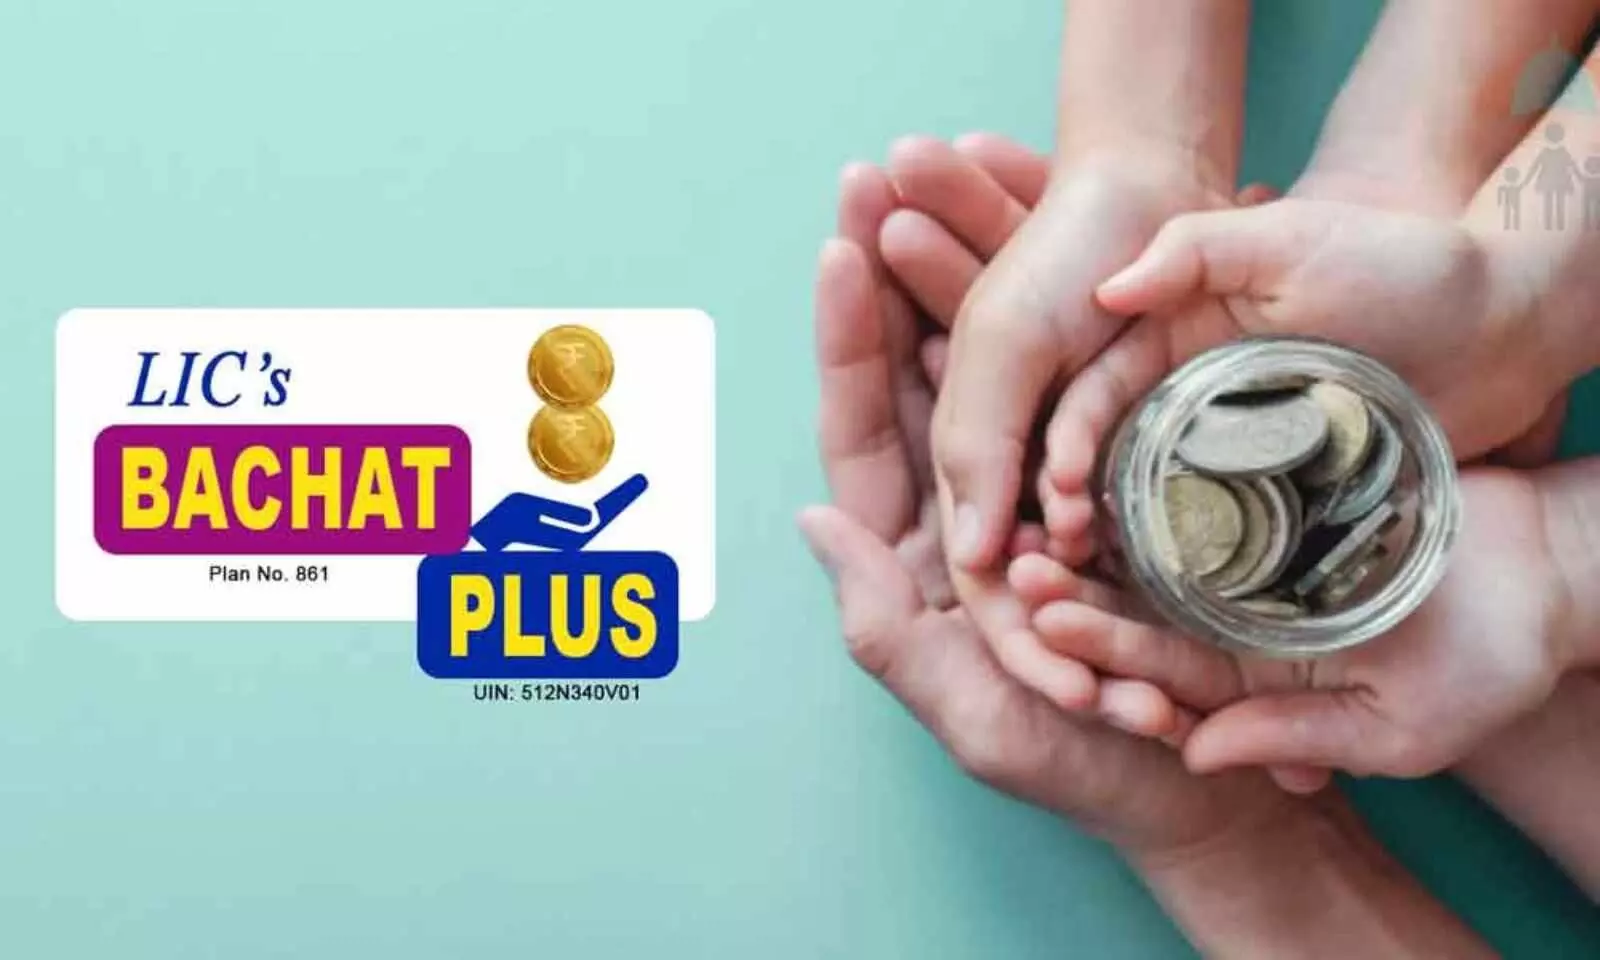 LIC launches new Bachat Plus plan